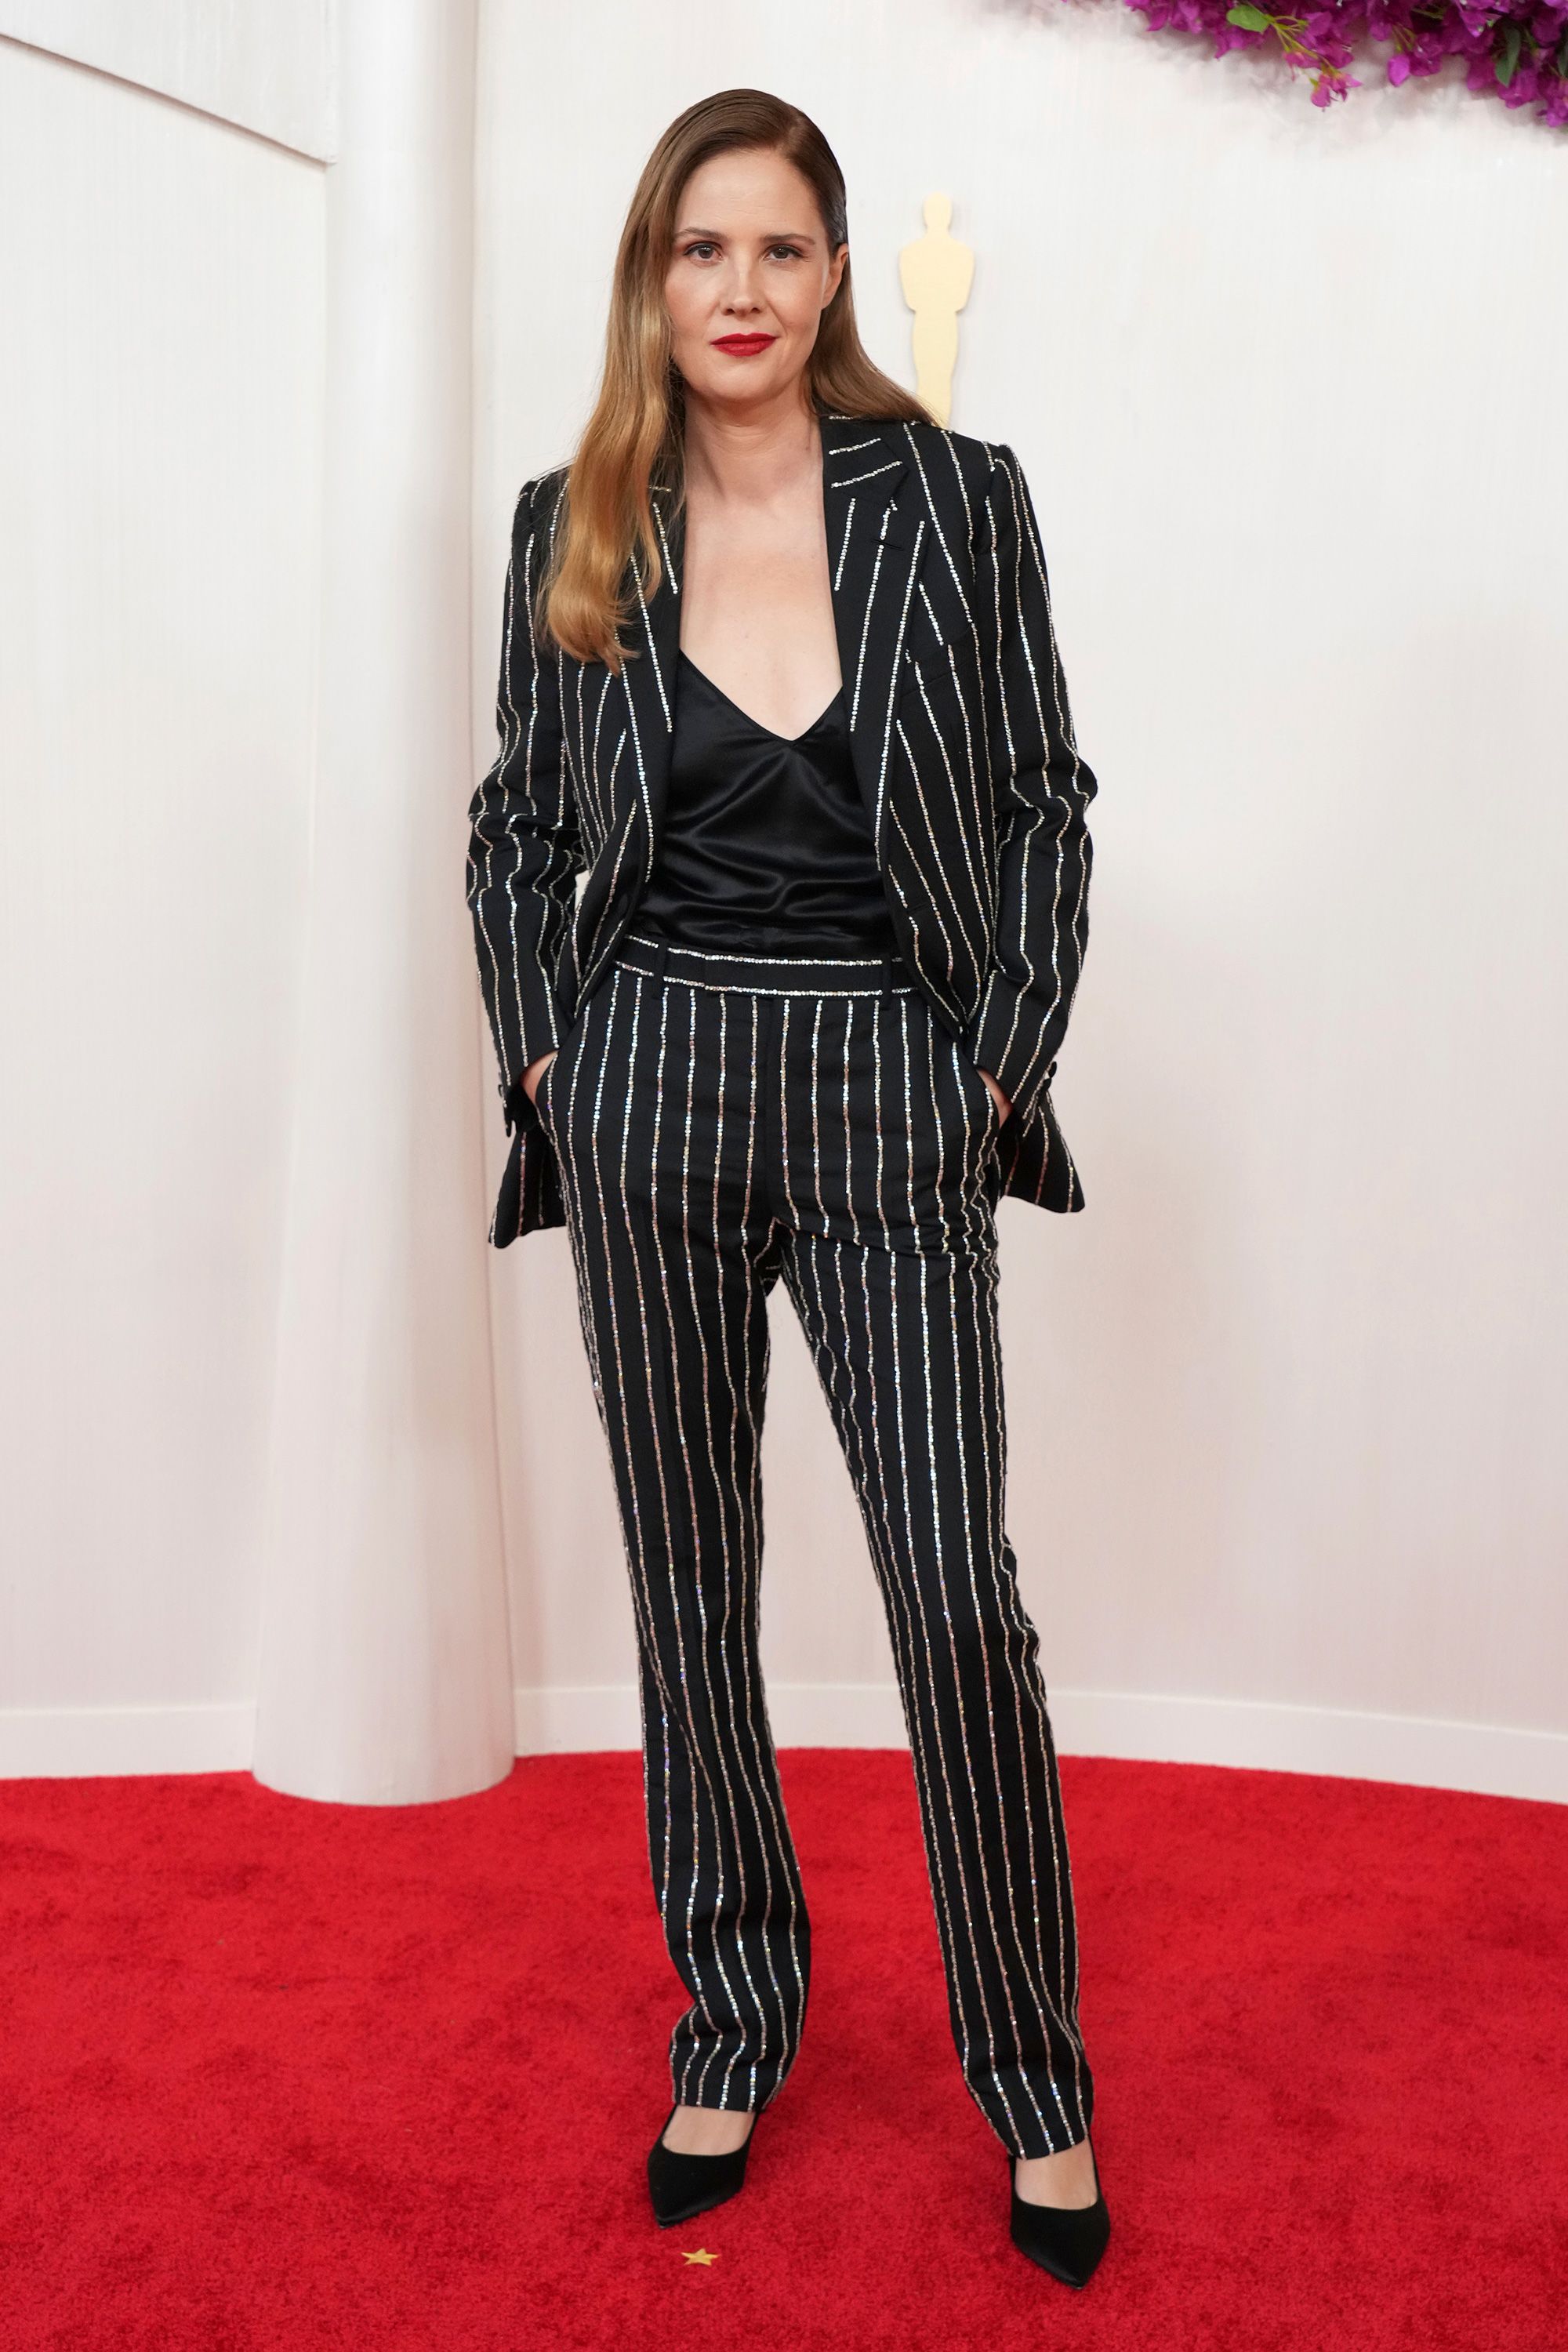 Justine Triet, who later won the Oscar for Best Original Screenplay for “Anatomy of a Fall,” wore a bright-striped Louis Vuitton suit.